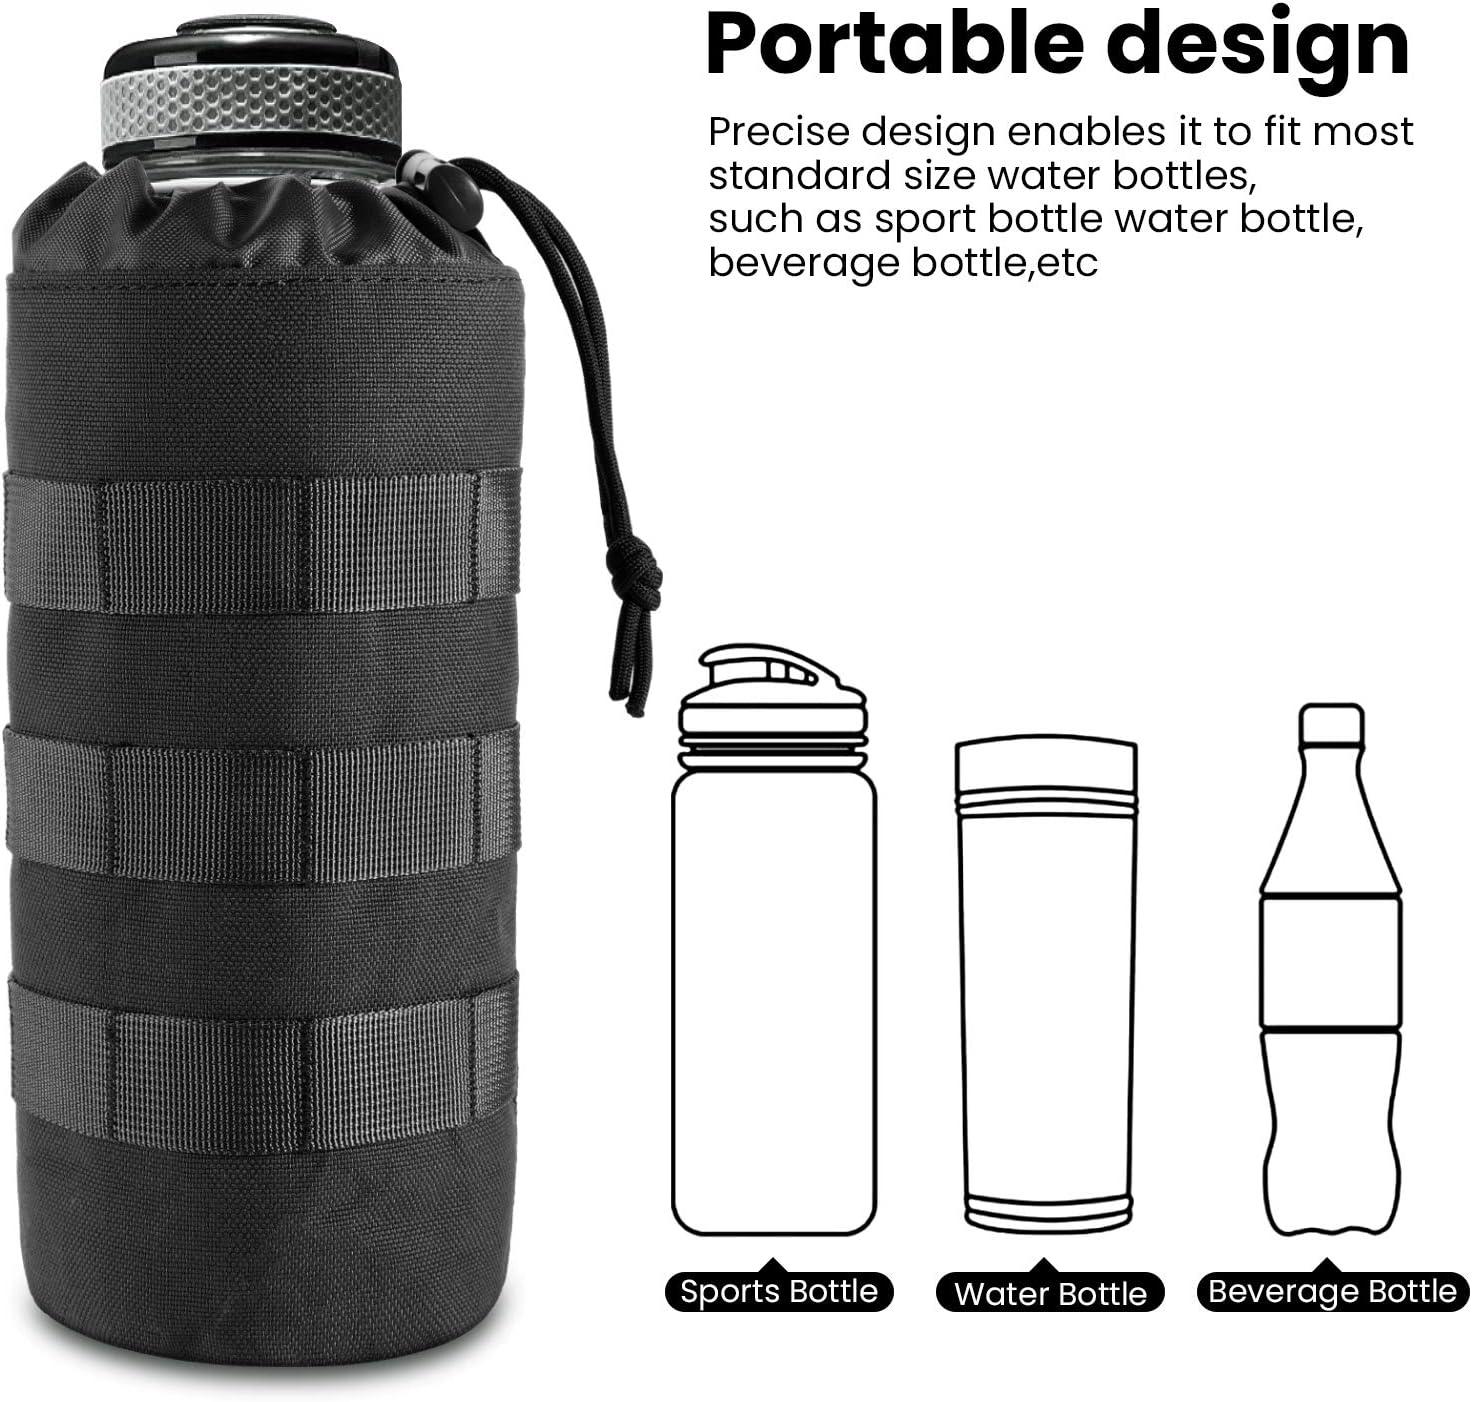 FRTKK Tactical MOLLE Water Bottle Pouch with Drawstring Open Top & Mesh  Bottom, Military Water Bottle Holder Bag Sports Travel Hydration Carrier  Black-1 pack